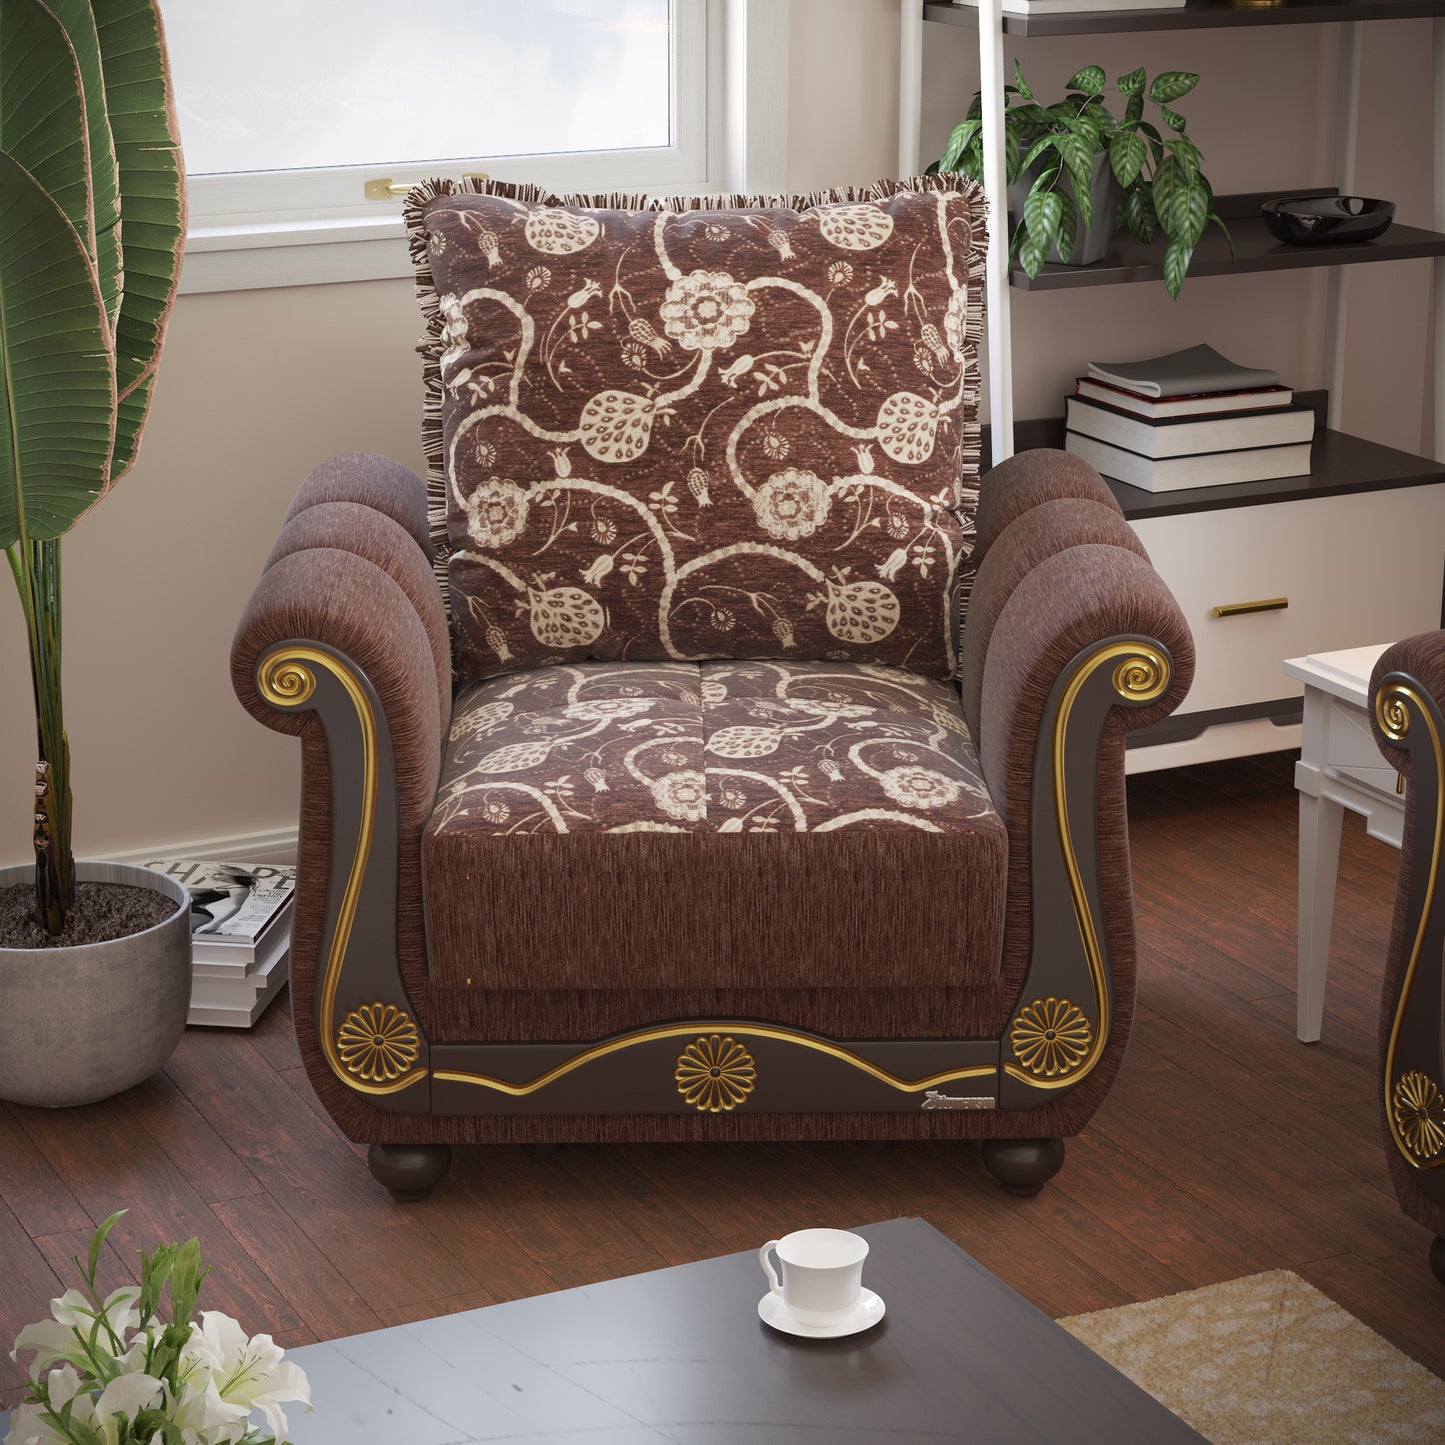 39" Brown Chenille Paisley Convertible Chair